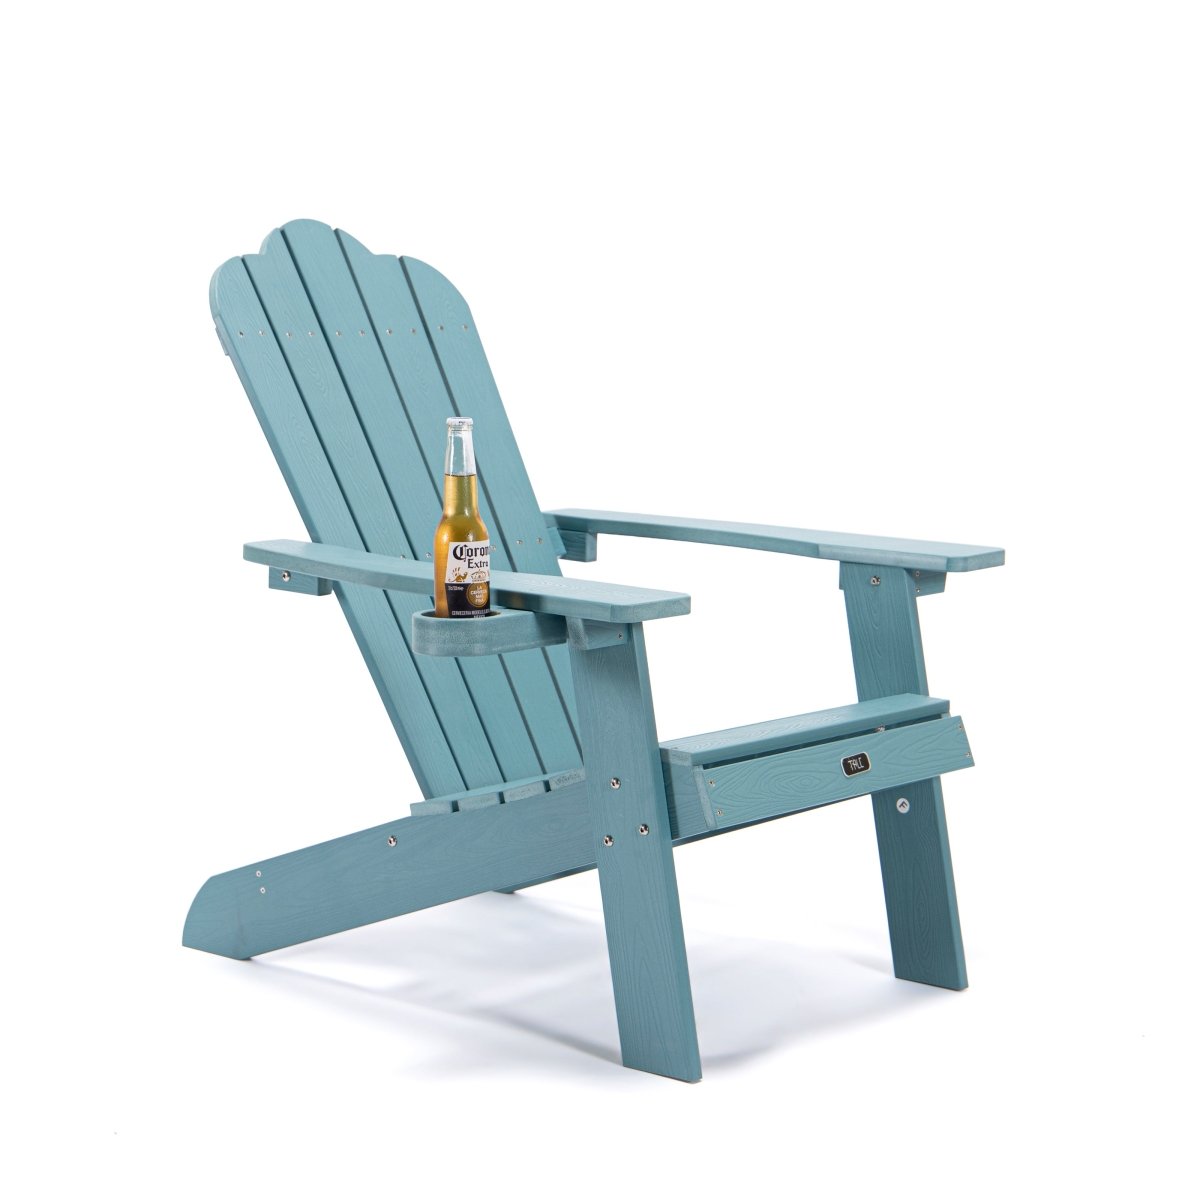 TrendyAffordables Adirondack Chair | Stylish, Durable Outdoor Seating - TrendyAffordables - 5